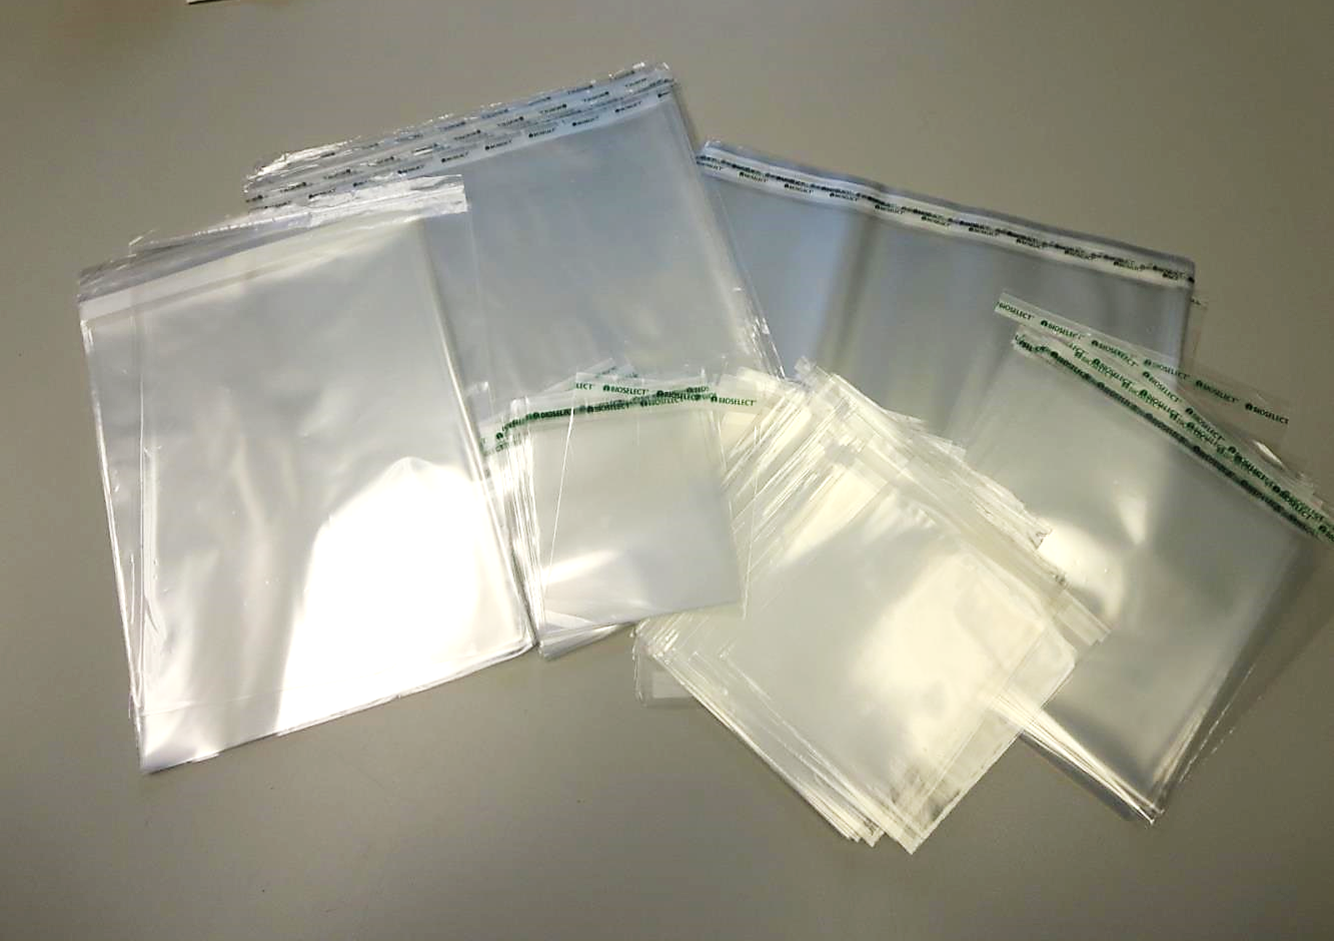 These 8-inch x 10-inch 100% compostable 1.2-mil clear Ingeo™ corn-based PLA food grade bags feature a 1″ lip and tape resealable closure. Pefect for wrapping sandwiches, desserts, cookies, snacks or packaging cutlery or napkins for take out. 